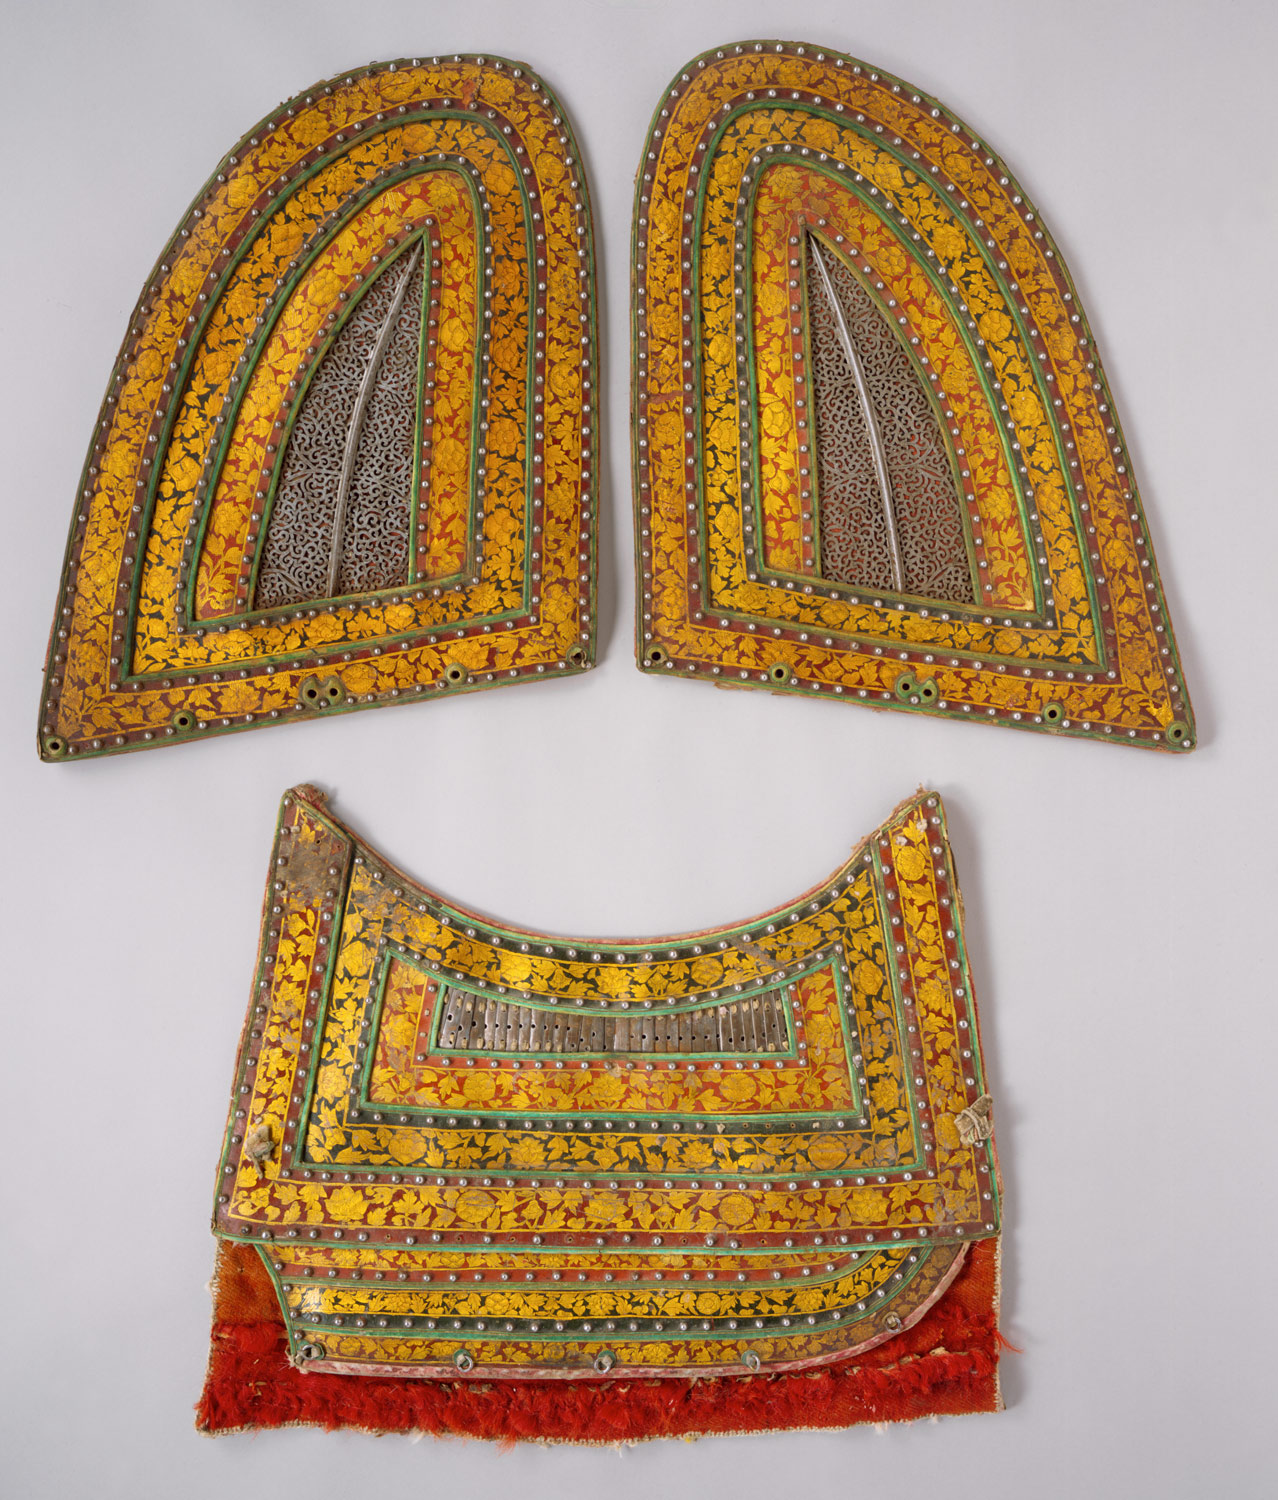 Pair of Neck Defenses (Crinet) and Breast Defense (Peytral) from a Horse Armor